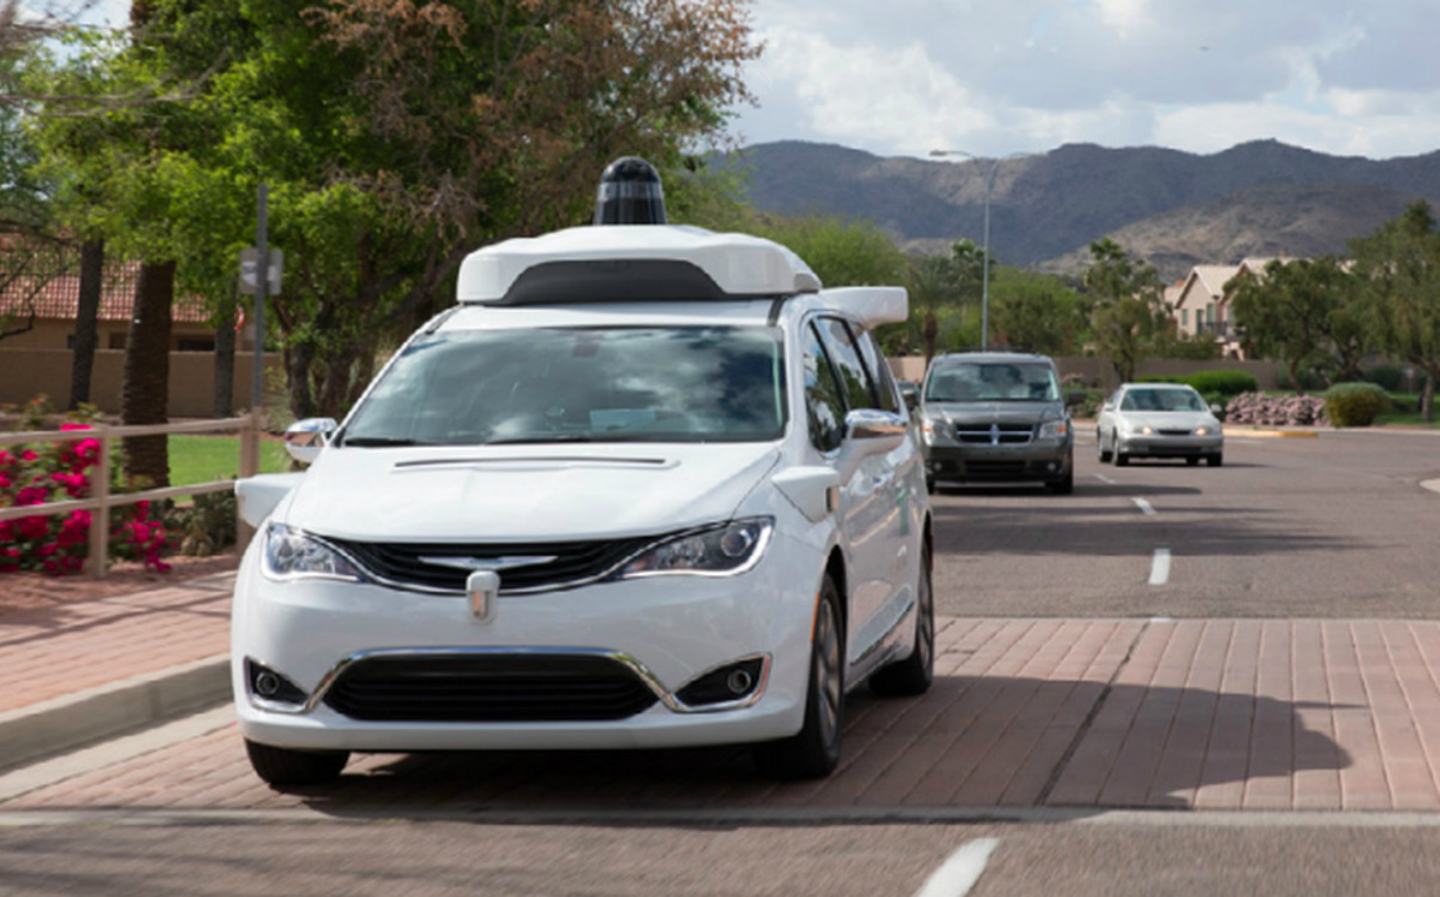 Waymo is first to operate driverless cars on public roads